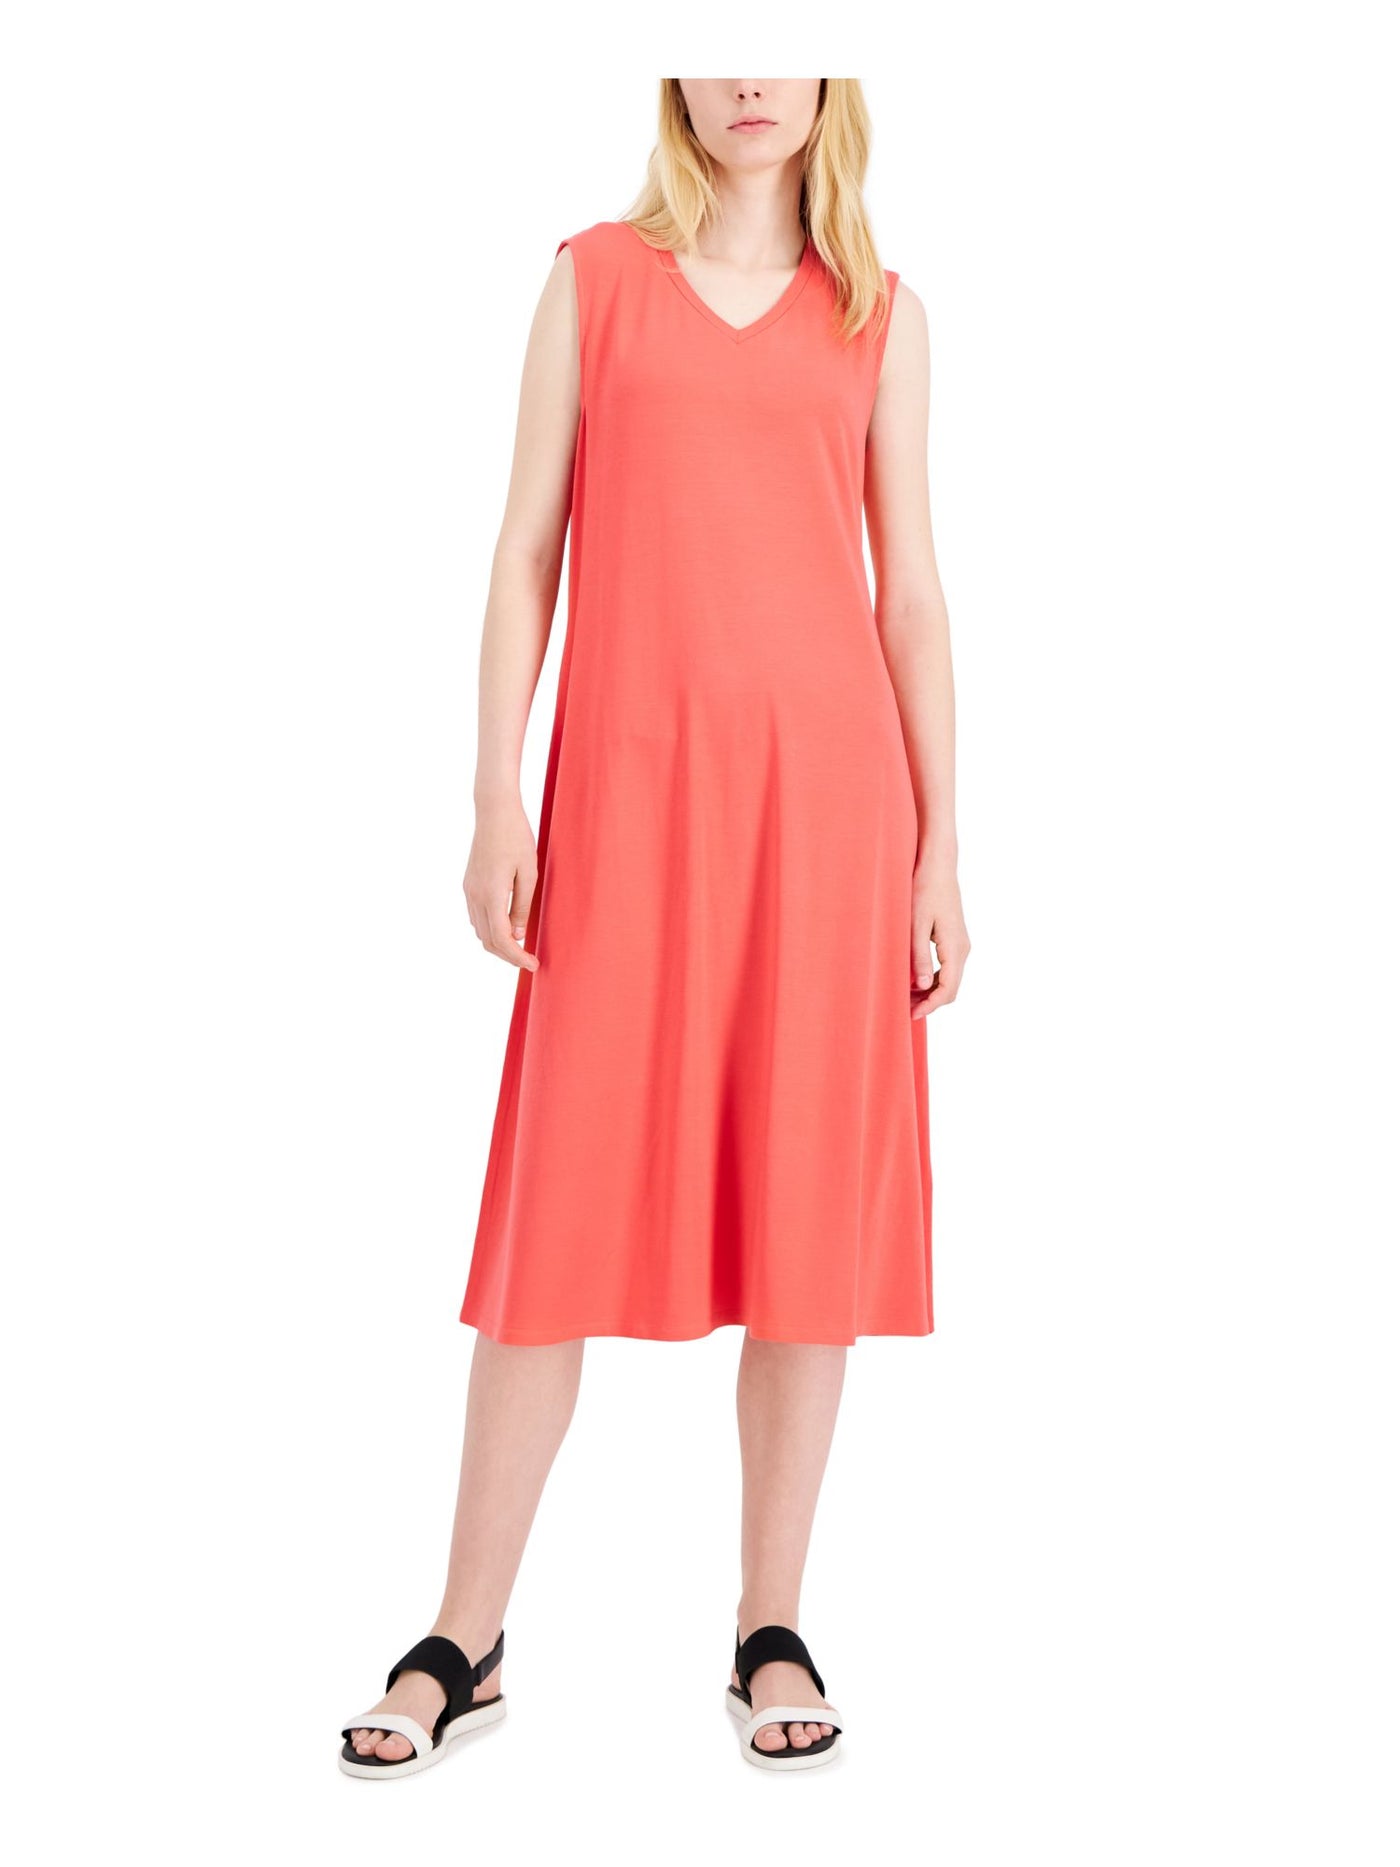 EILEEN FISHER Womens Coral Unlined Pullover Sleeveless V Neck Below The Knee Shift Dress Petites PP